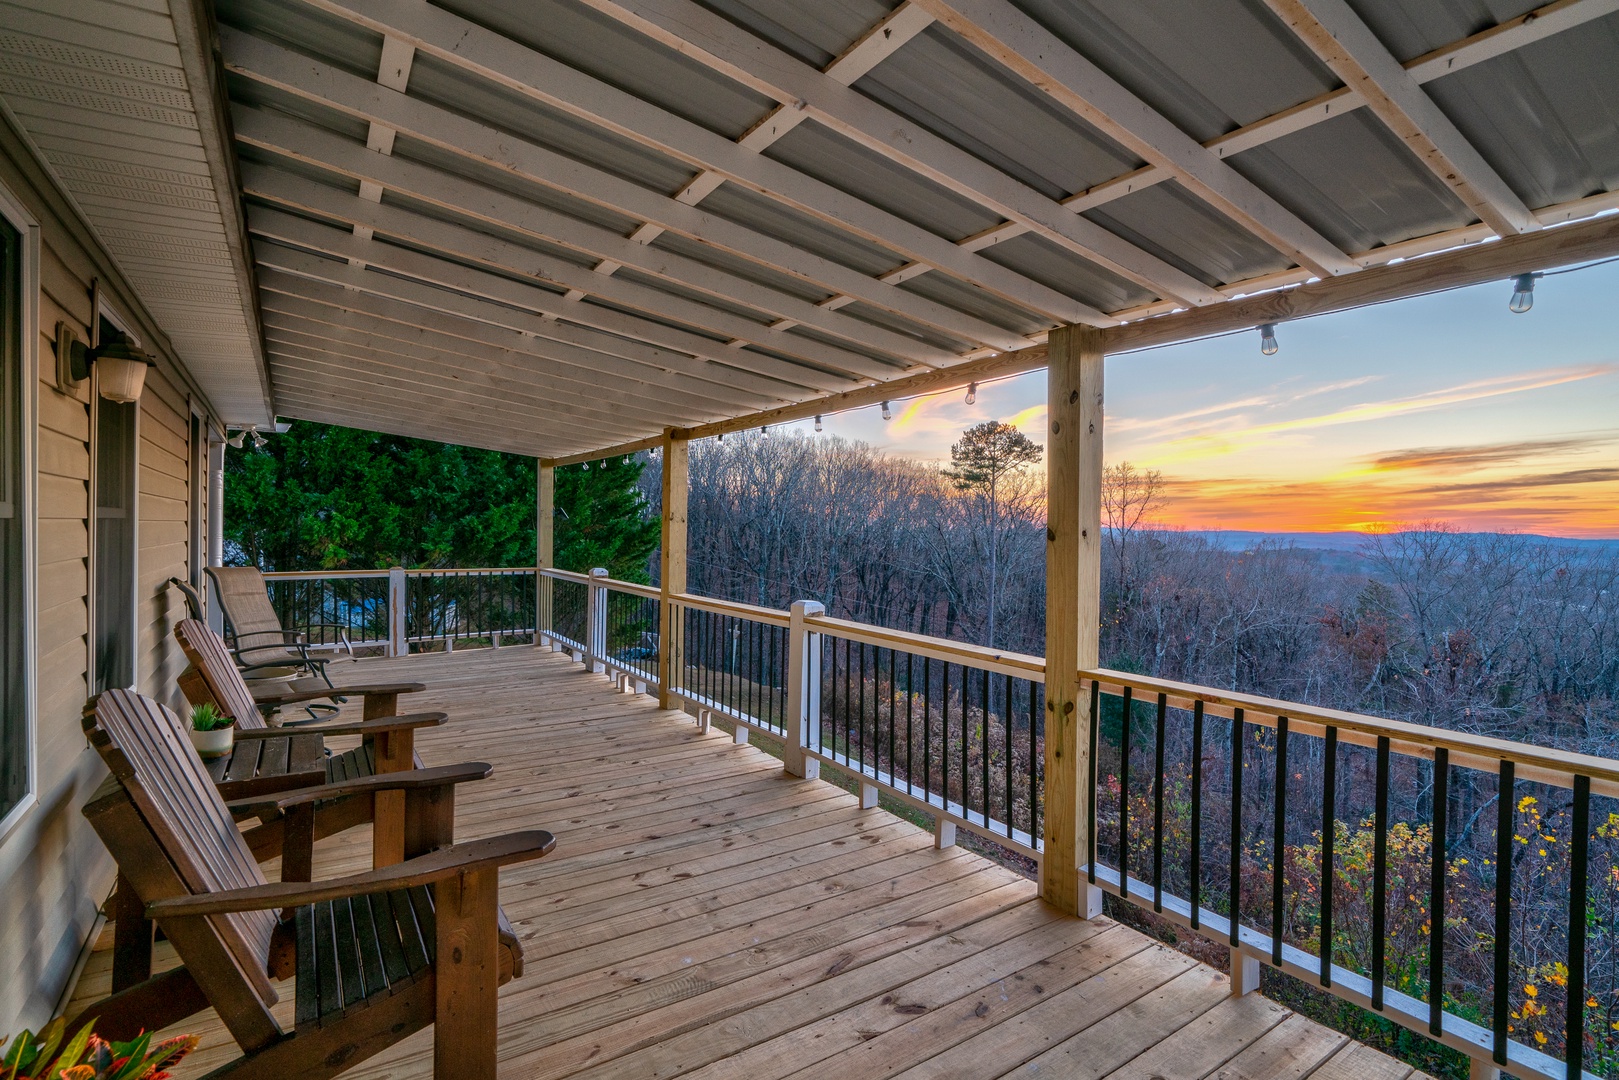 The sunsetting over Ellijay and you will have a front row seat